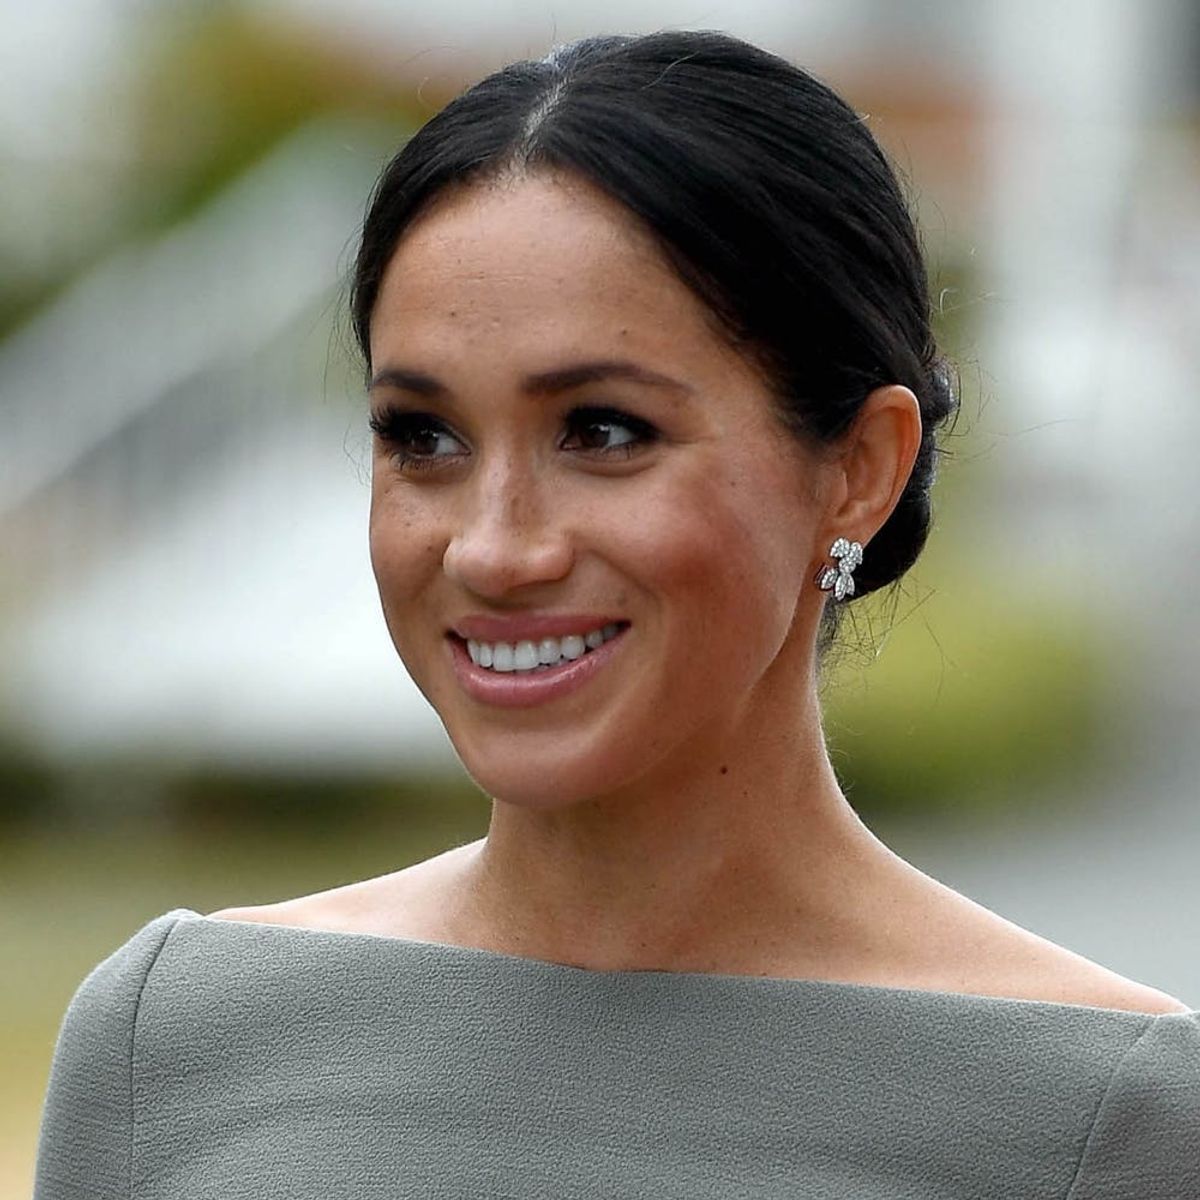 Meghan Markle’s $328 Dress From Your Favorite Mall Store Is Finally Back In Stock